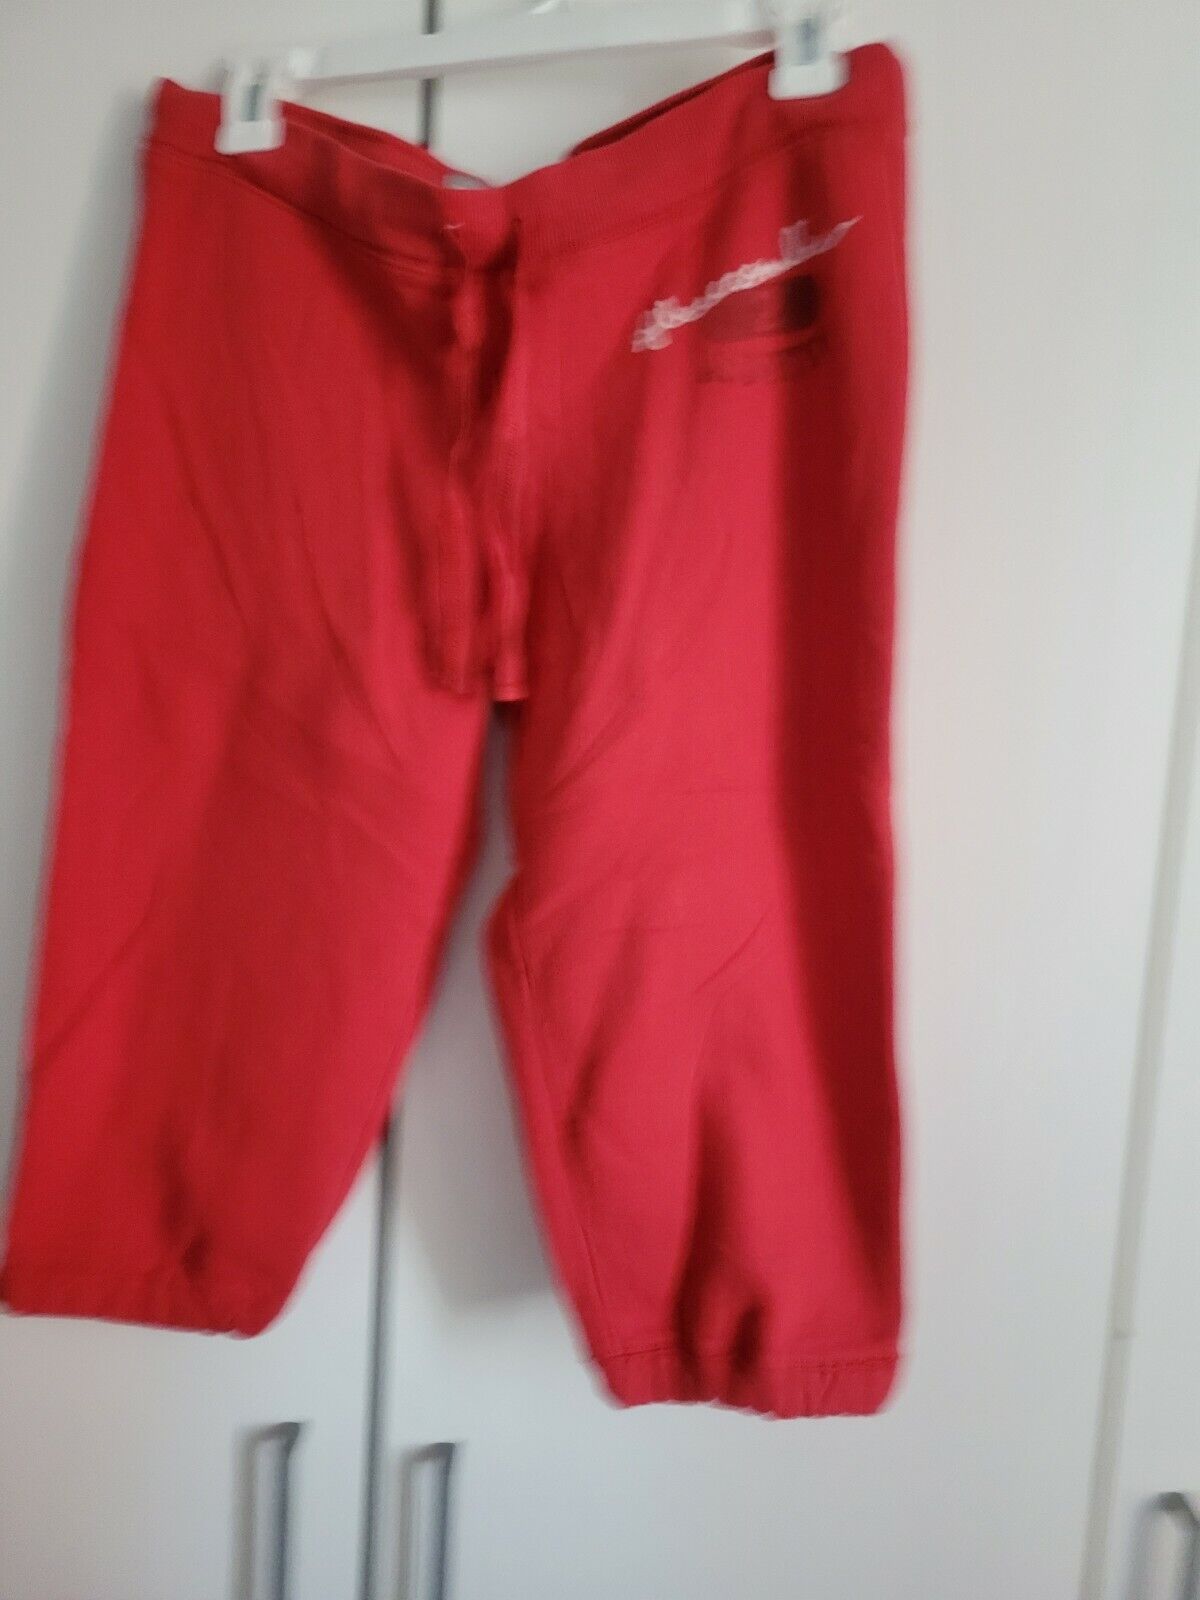 Abercrombie and Fitch 1892 red fleece mid pants logo zip end leg S | eBay